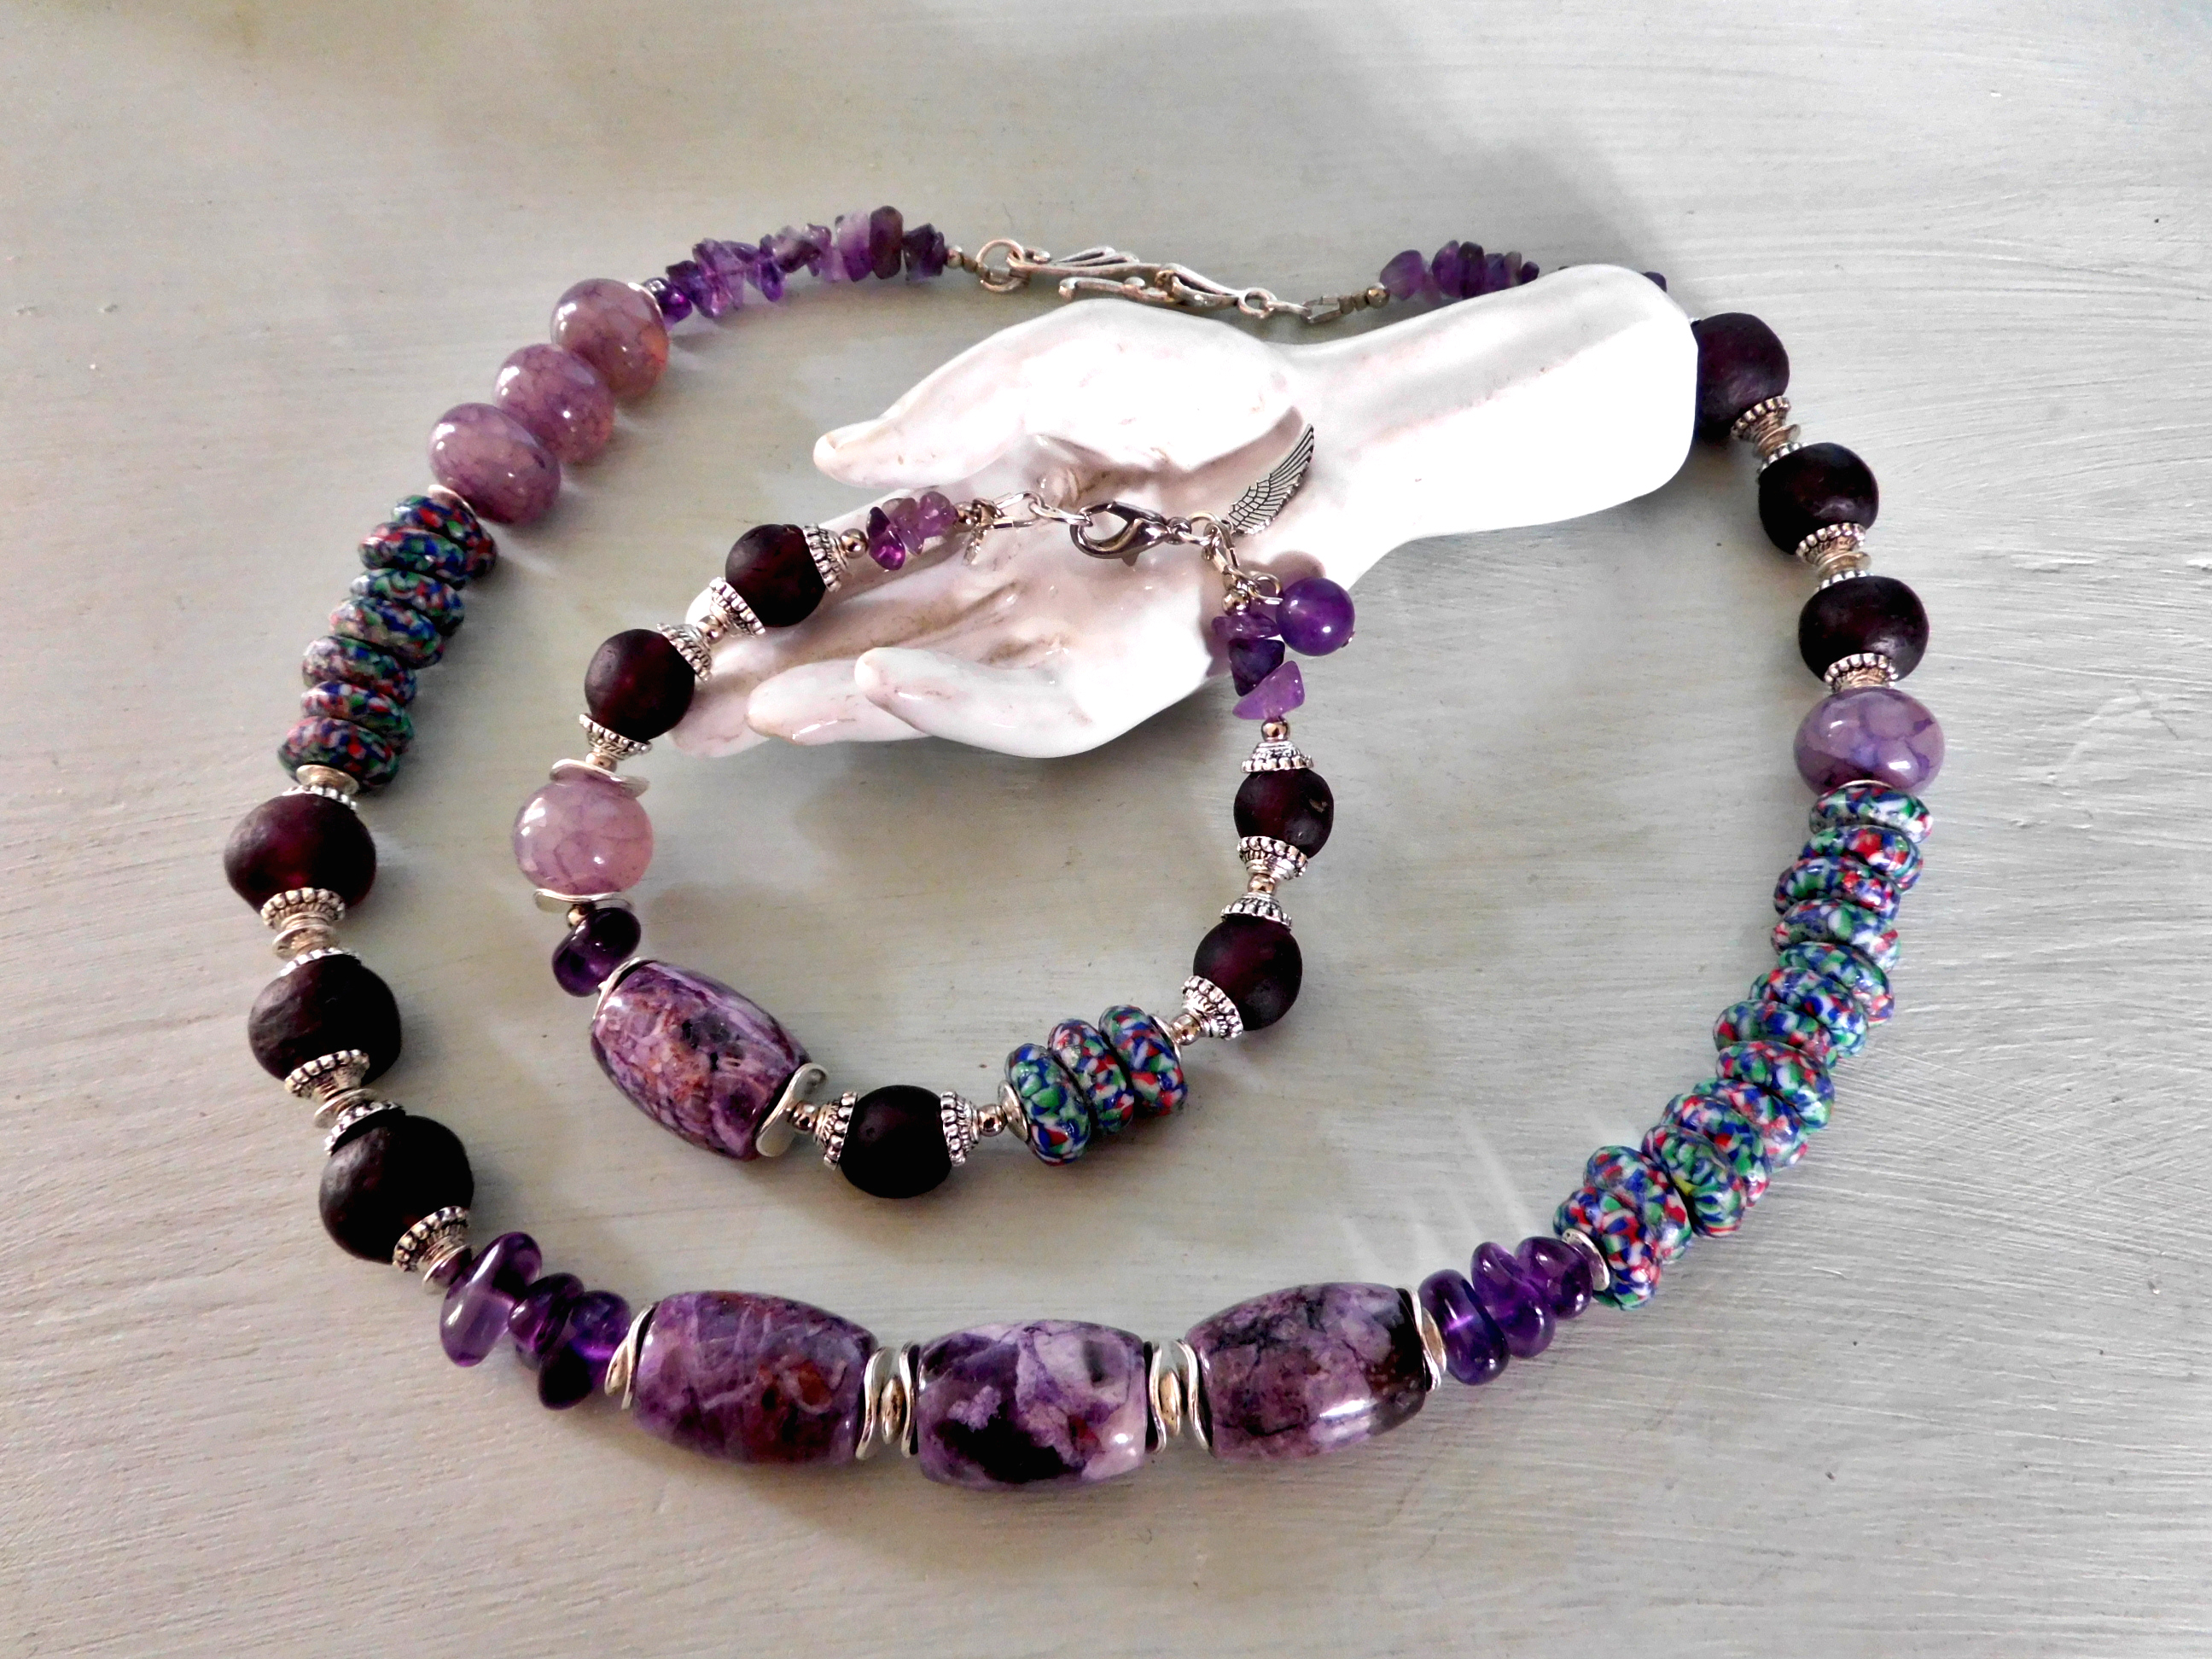 Necklace "purple dream" mixed beads